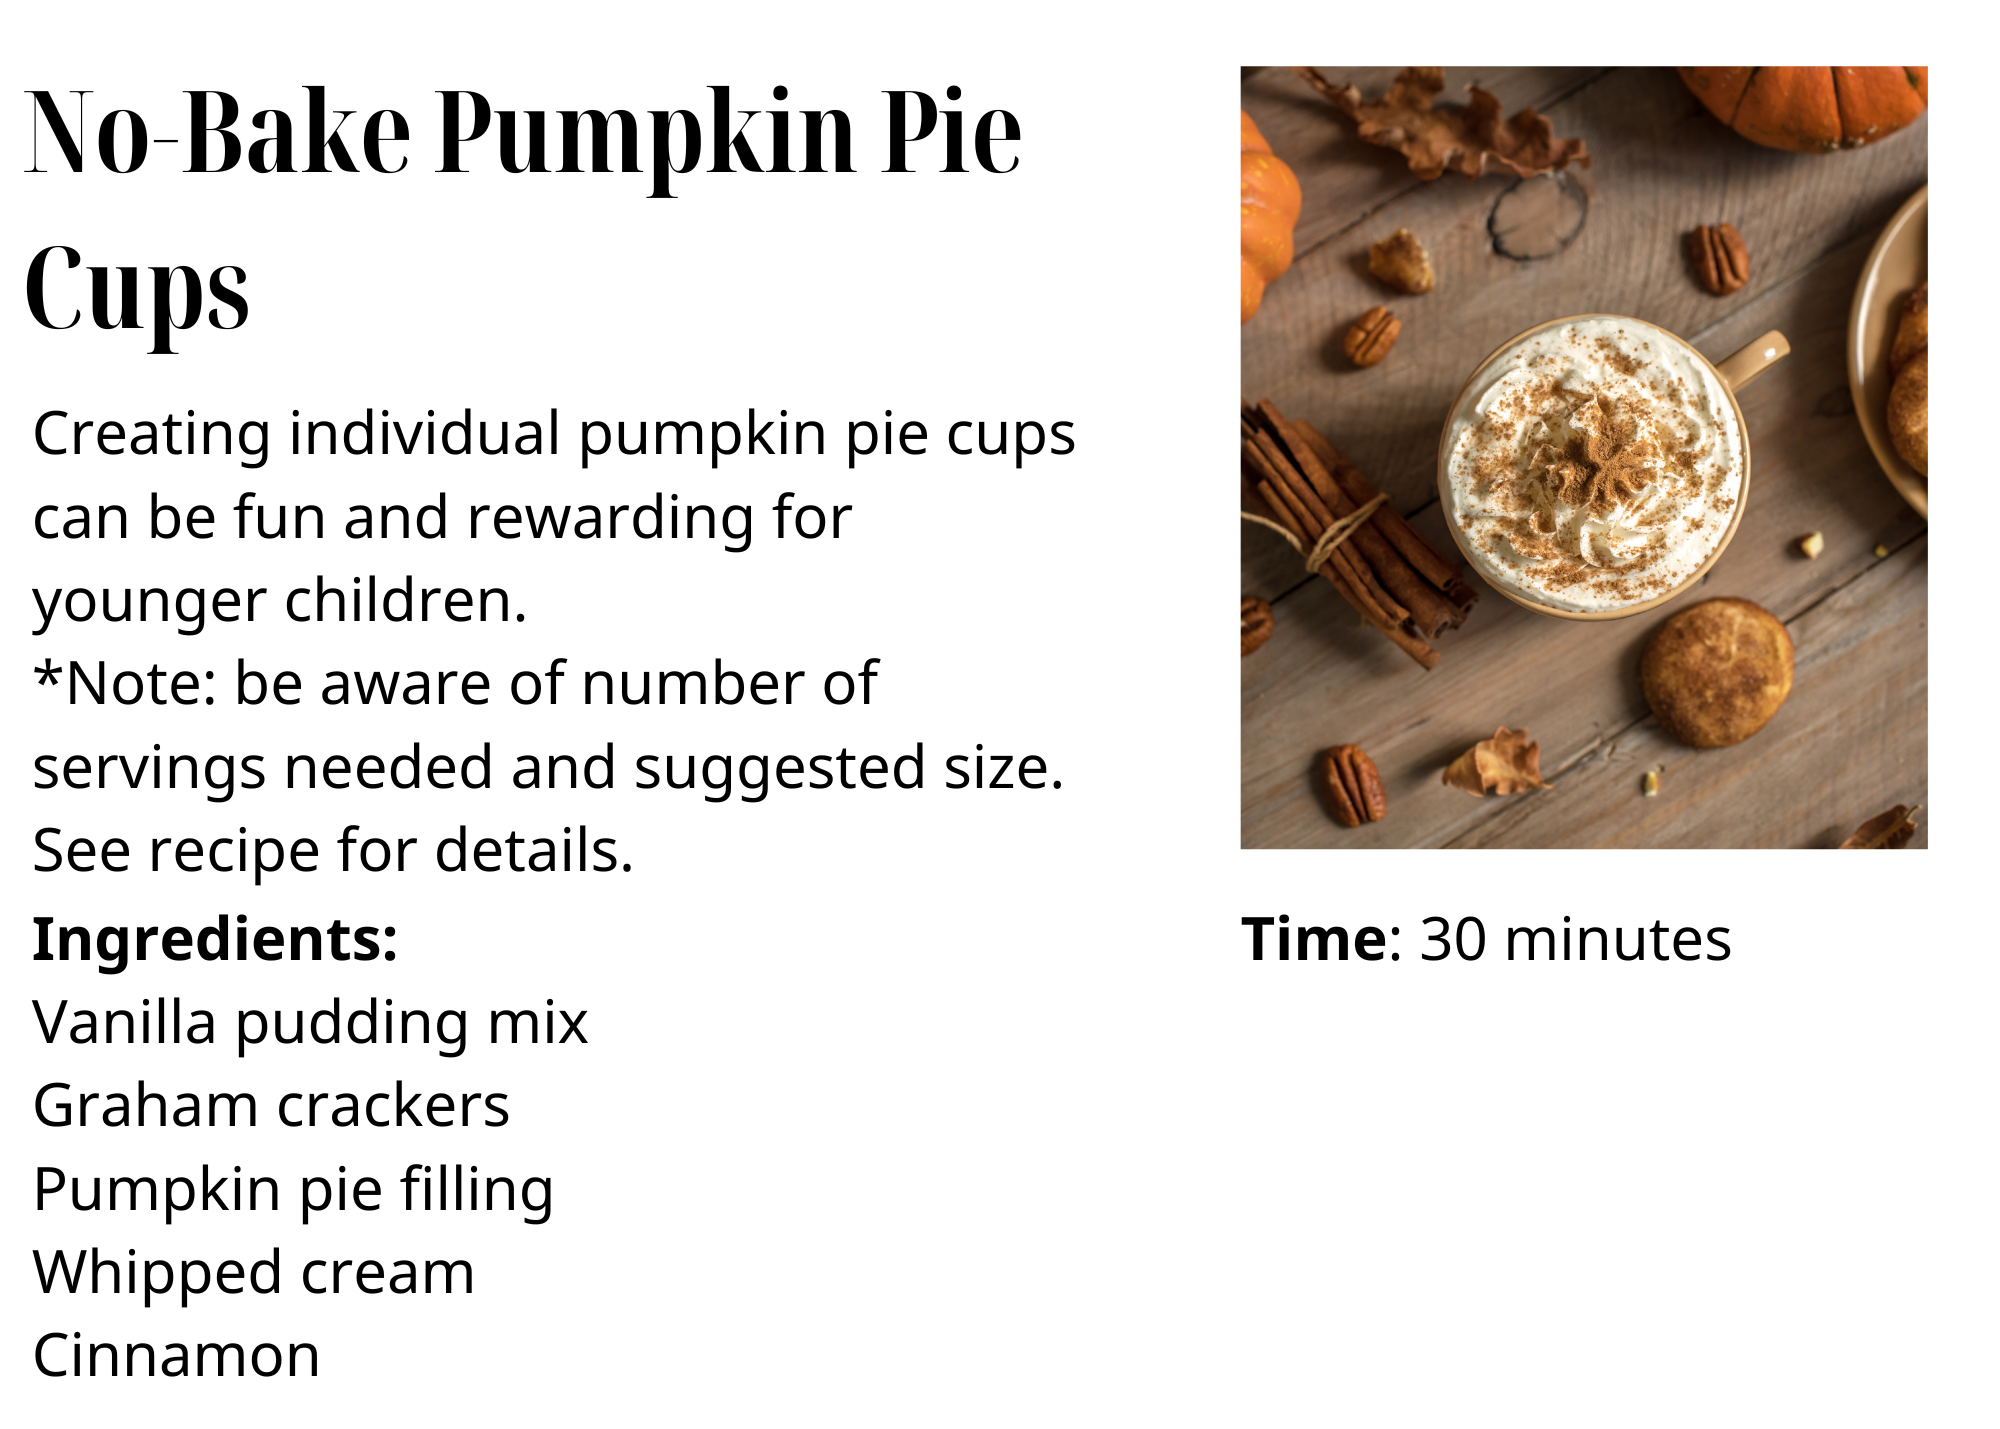 No Bake Pumpkin Pie Recipes for kids. Kids in the kitchens Kids cooking for Thanksgiving dinner